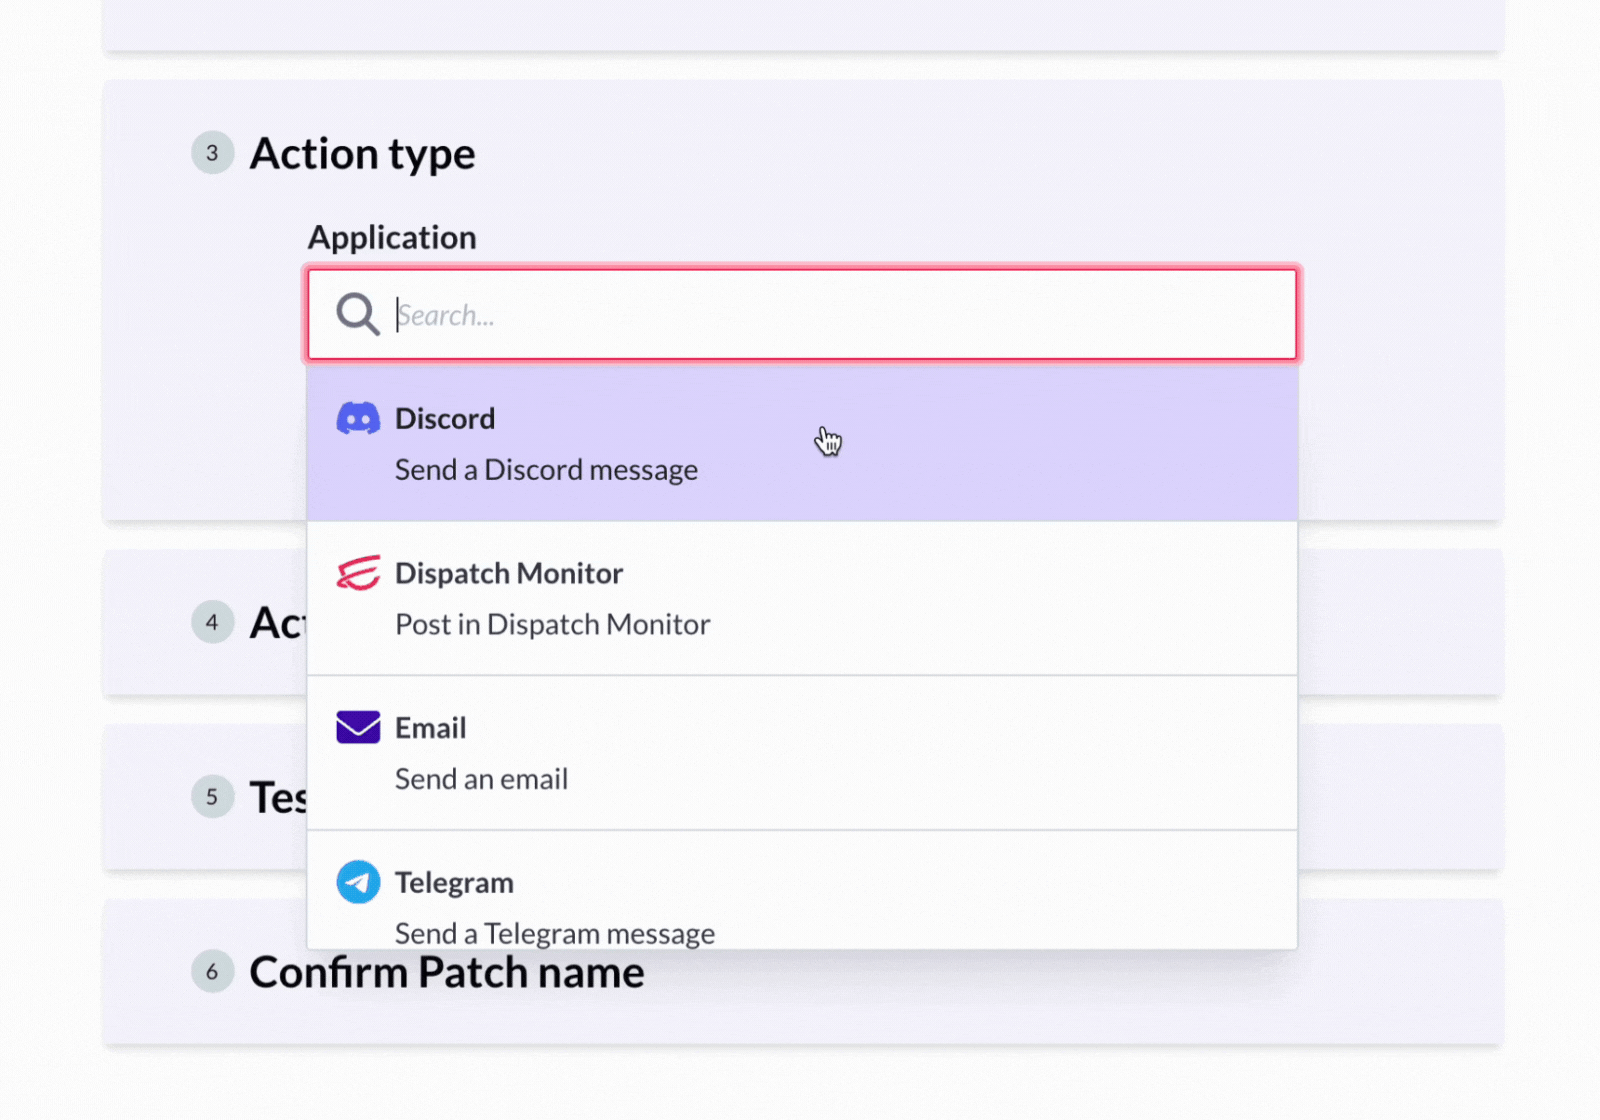 Dispatch Discord action type